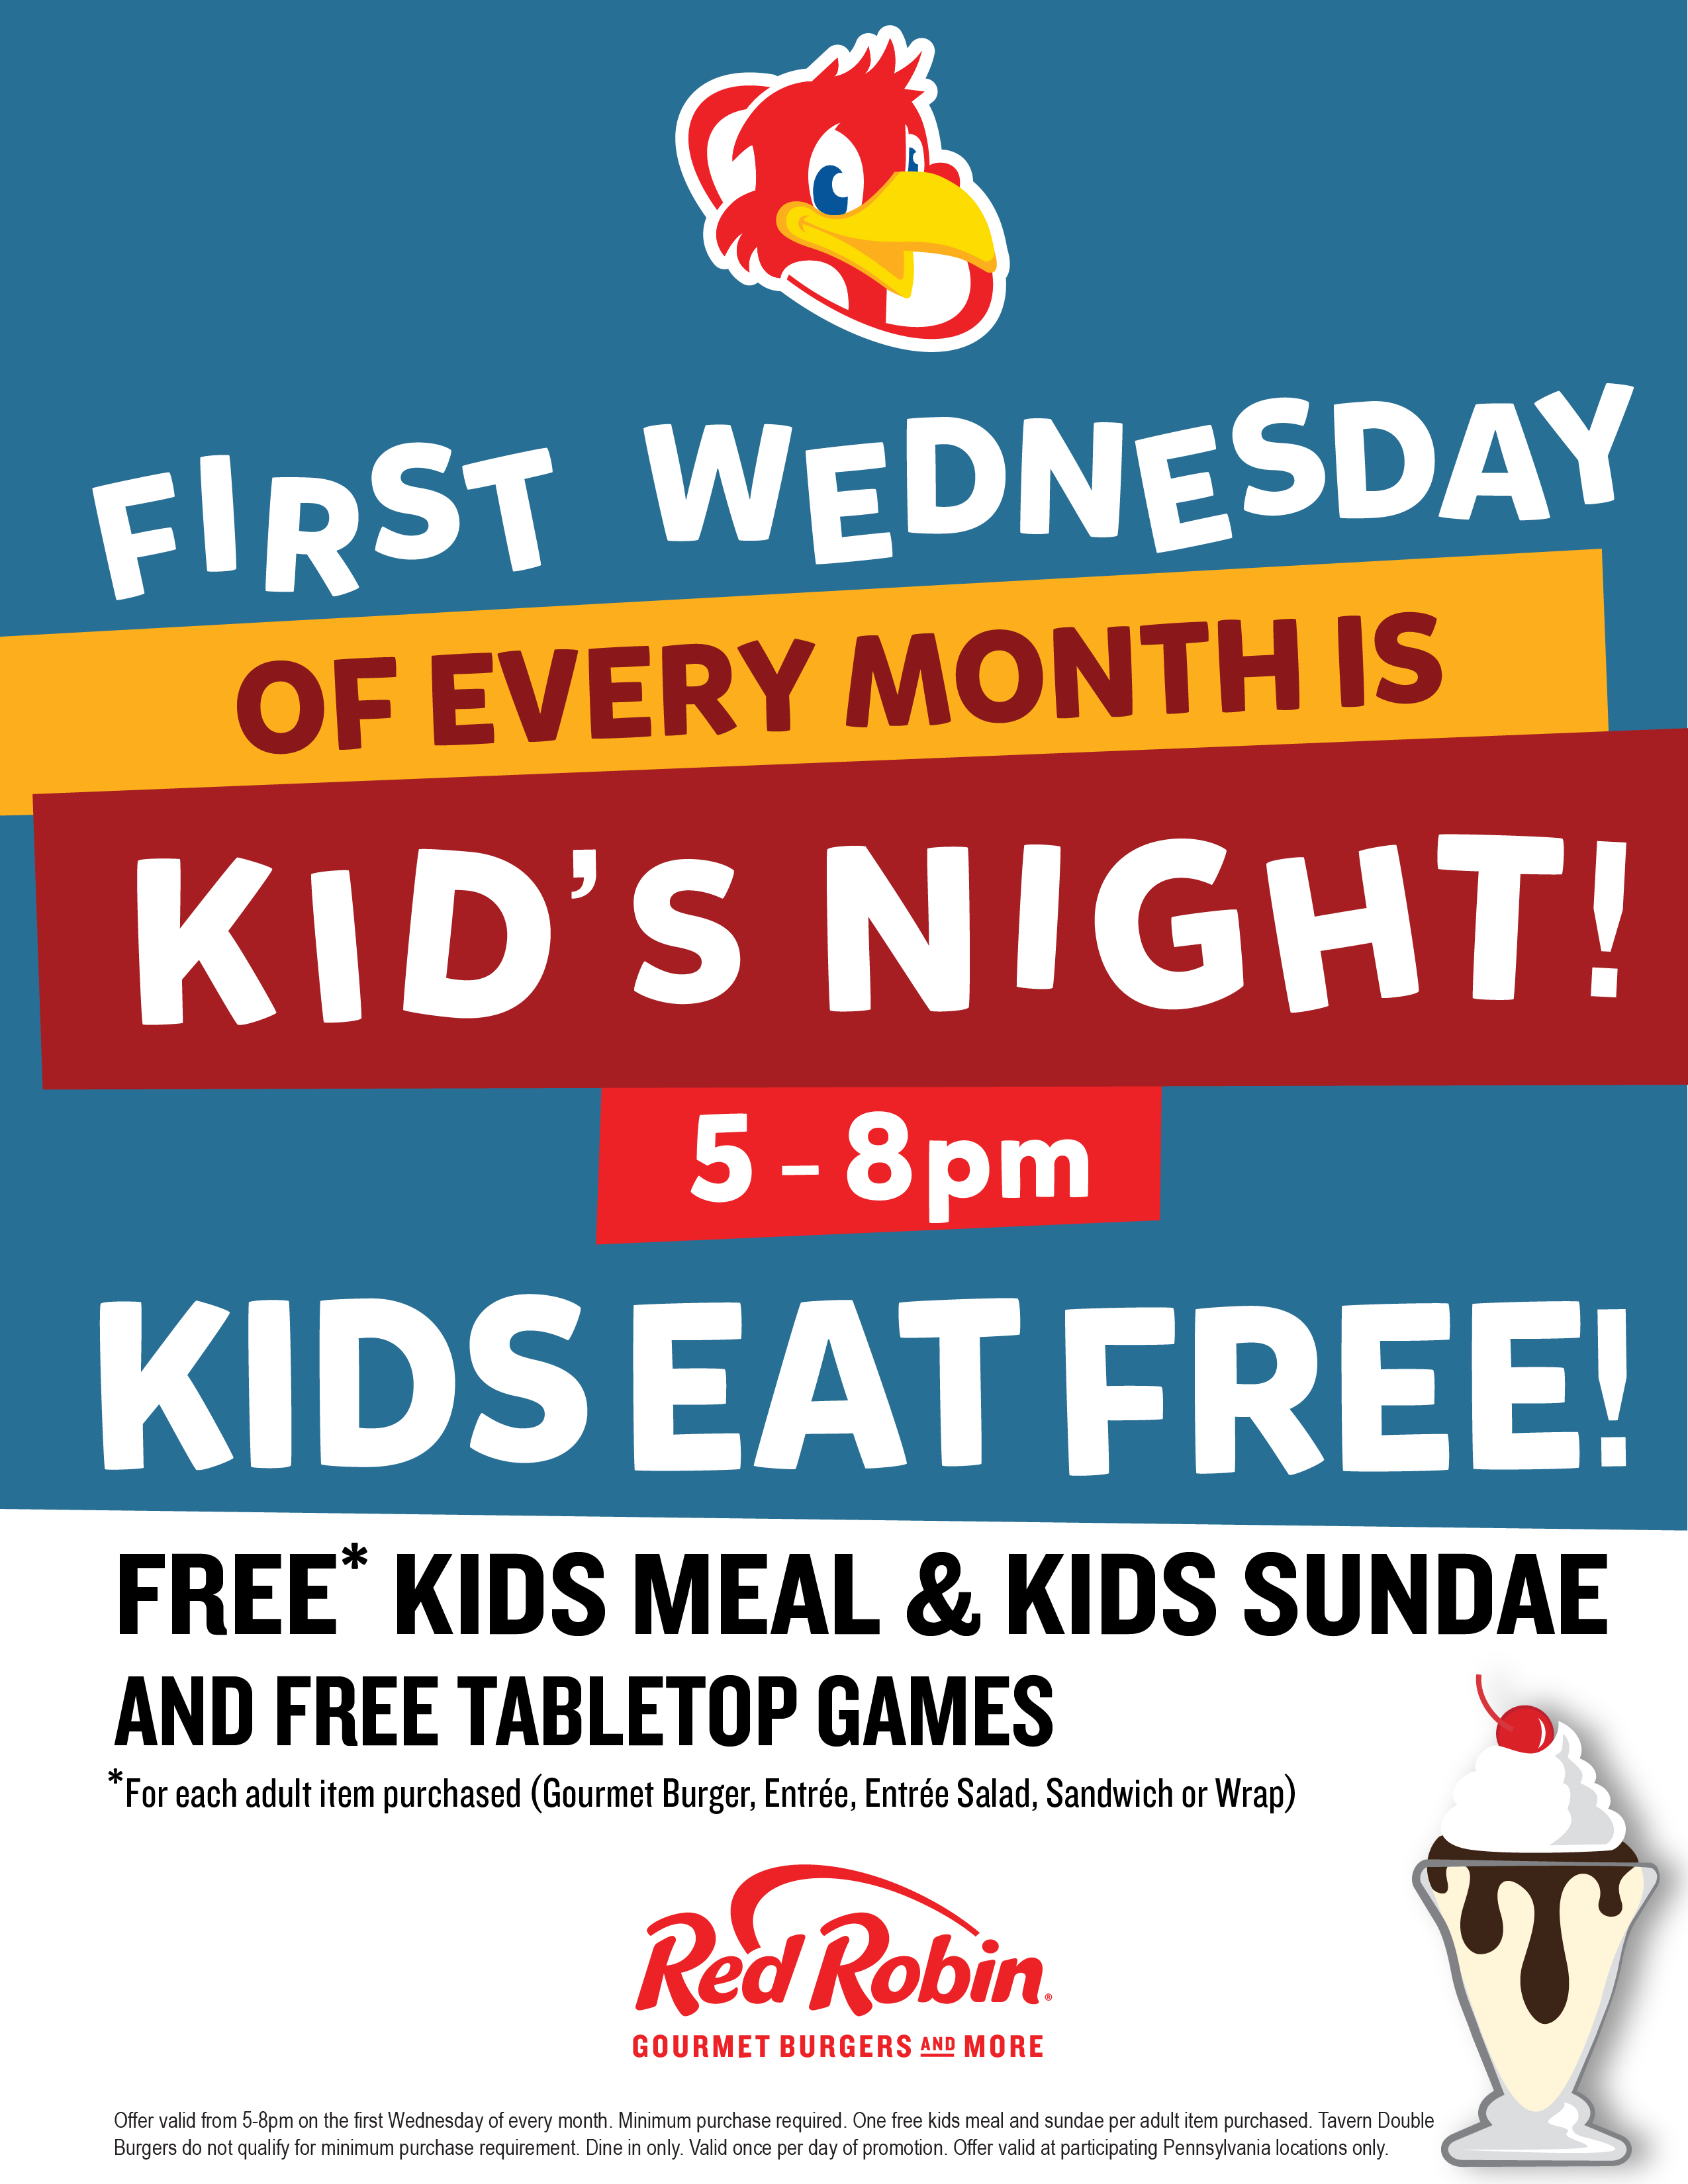 An image of the Kid's Night program details and dislaimer at participating Pennsylvania Red Robin locations